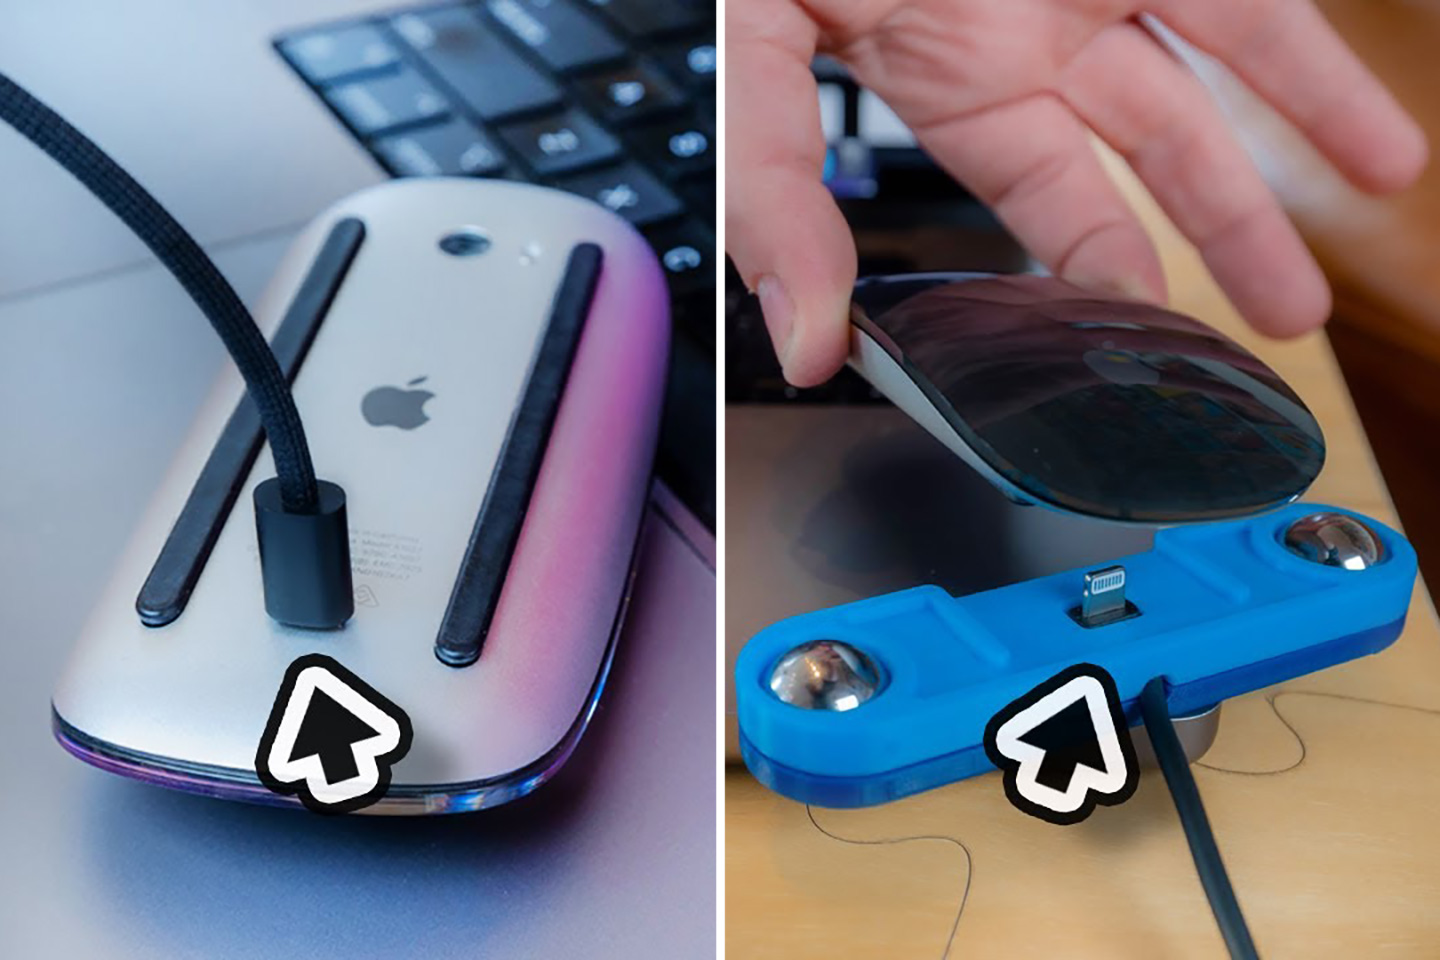 #Apple’s BIGGEST design flaw gets (sort of) fixed by this YouTuber’s 3D-printed plastic accessory